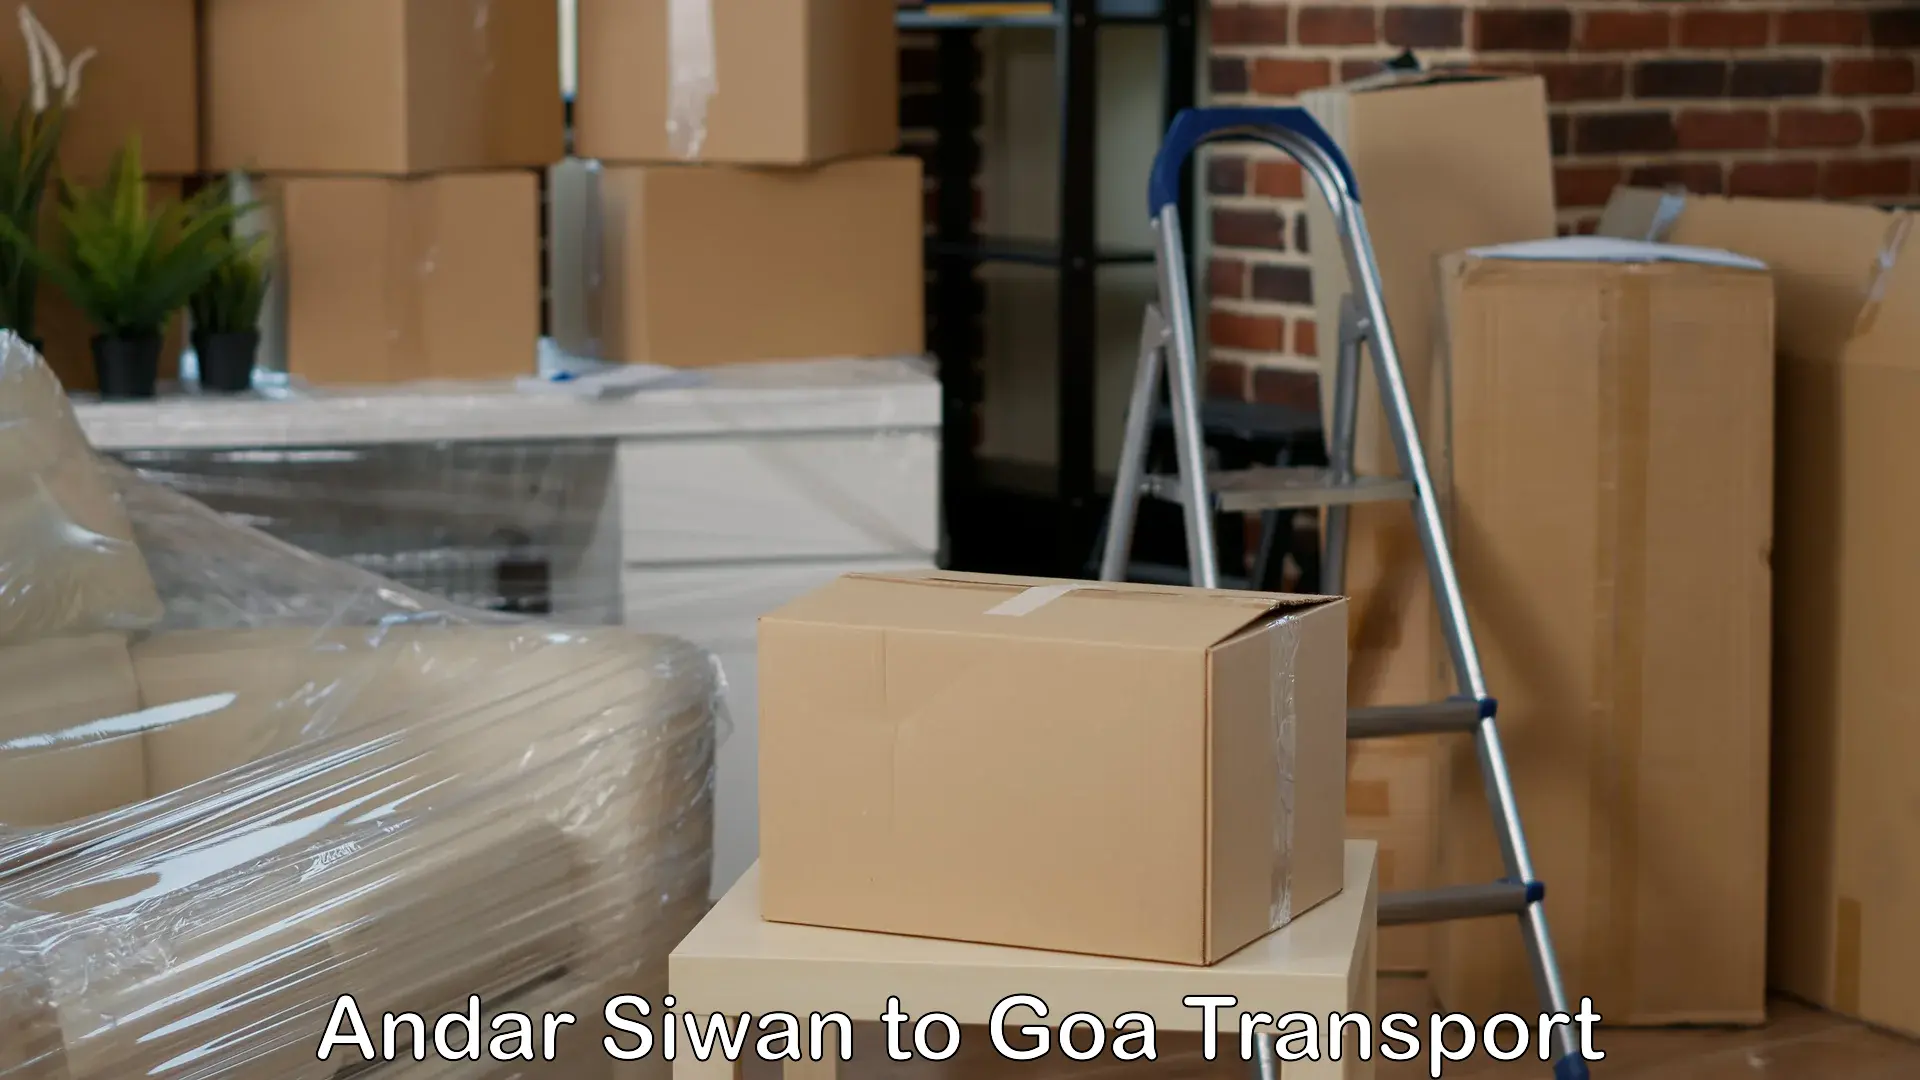 Container transport service in Andar Siwan to Goa